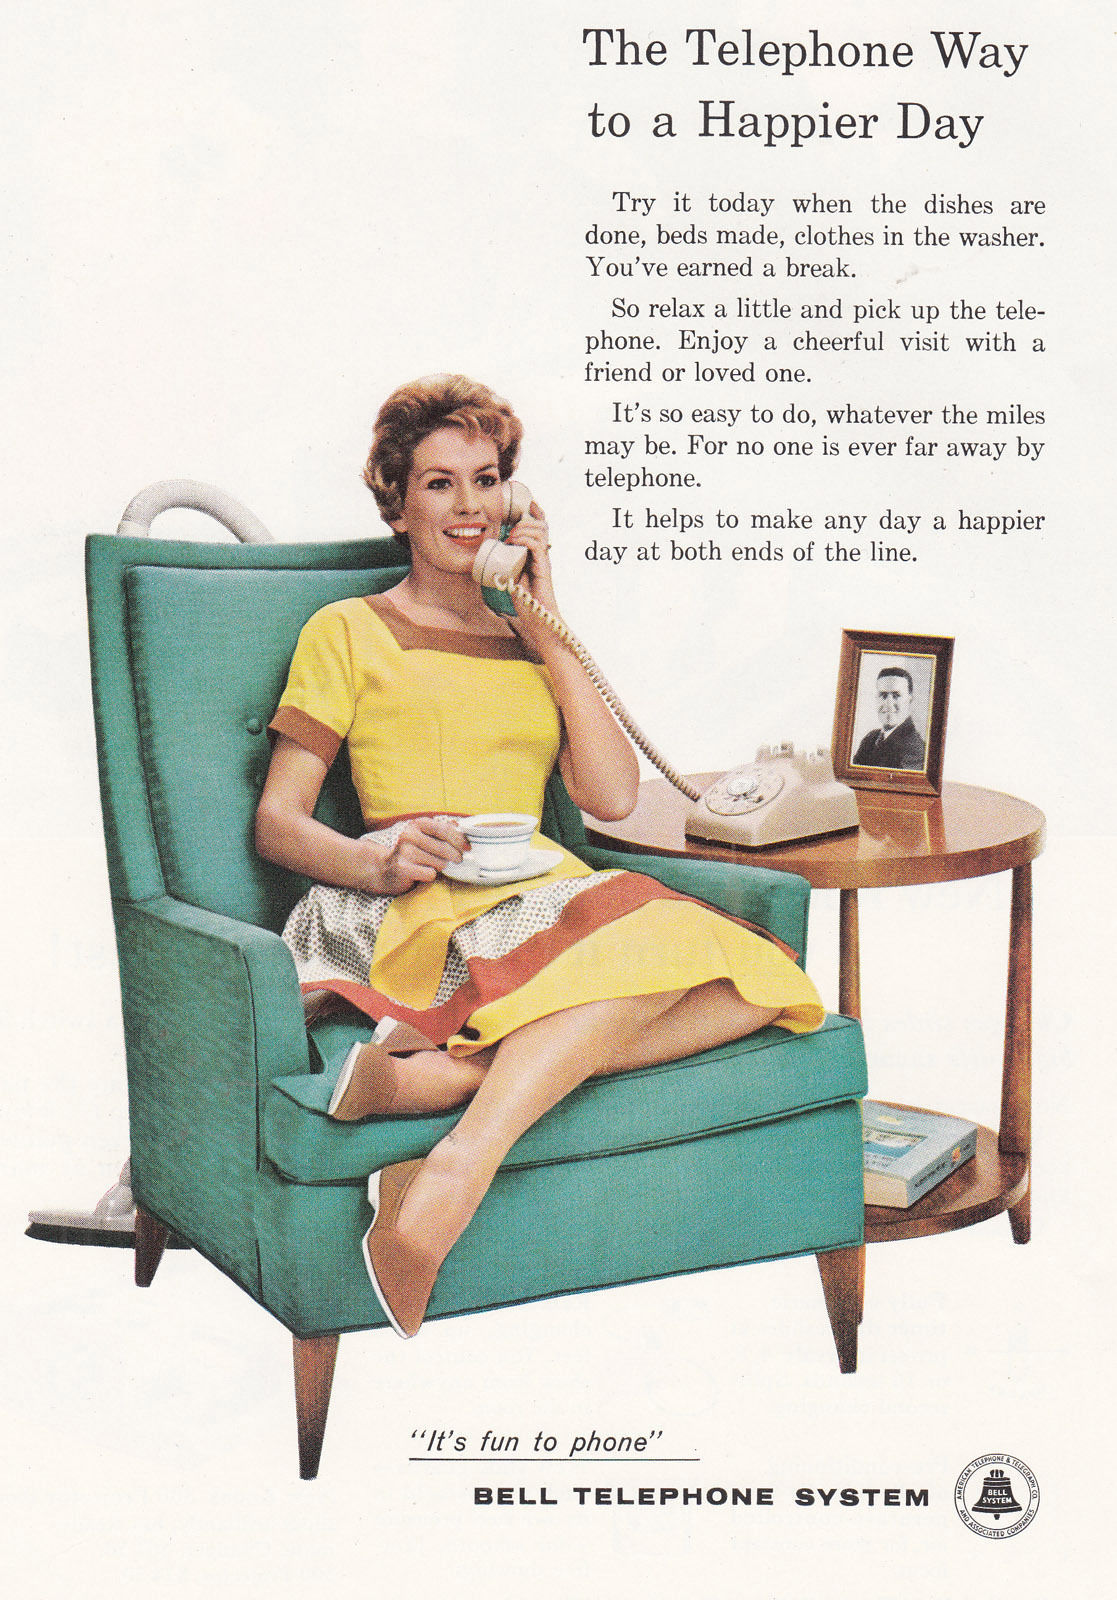 Bell Telephone System - published in National Geographic - September 1958